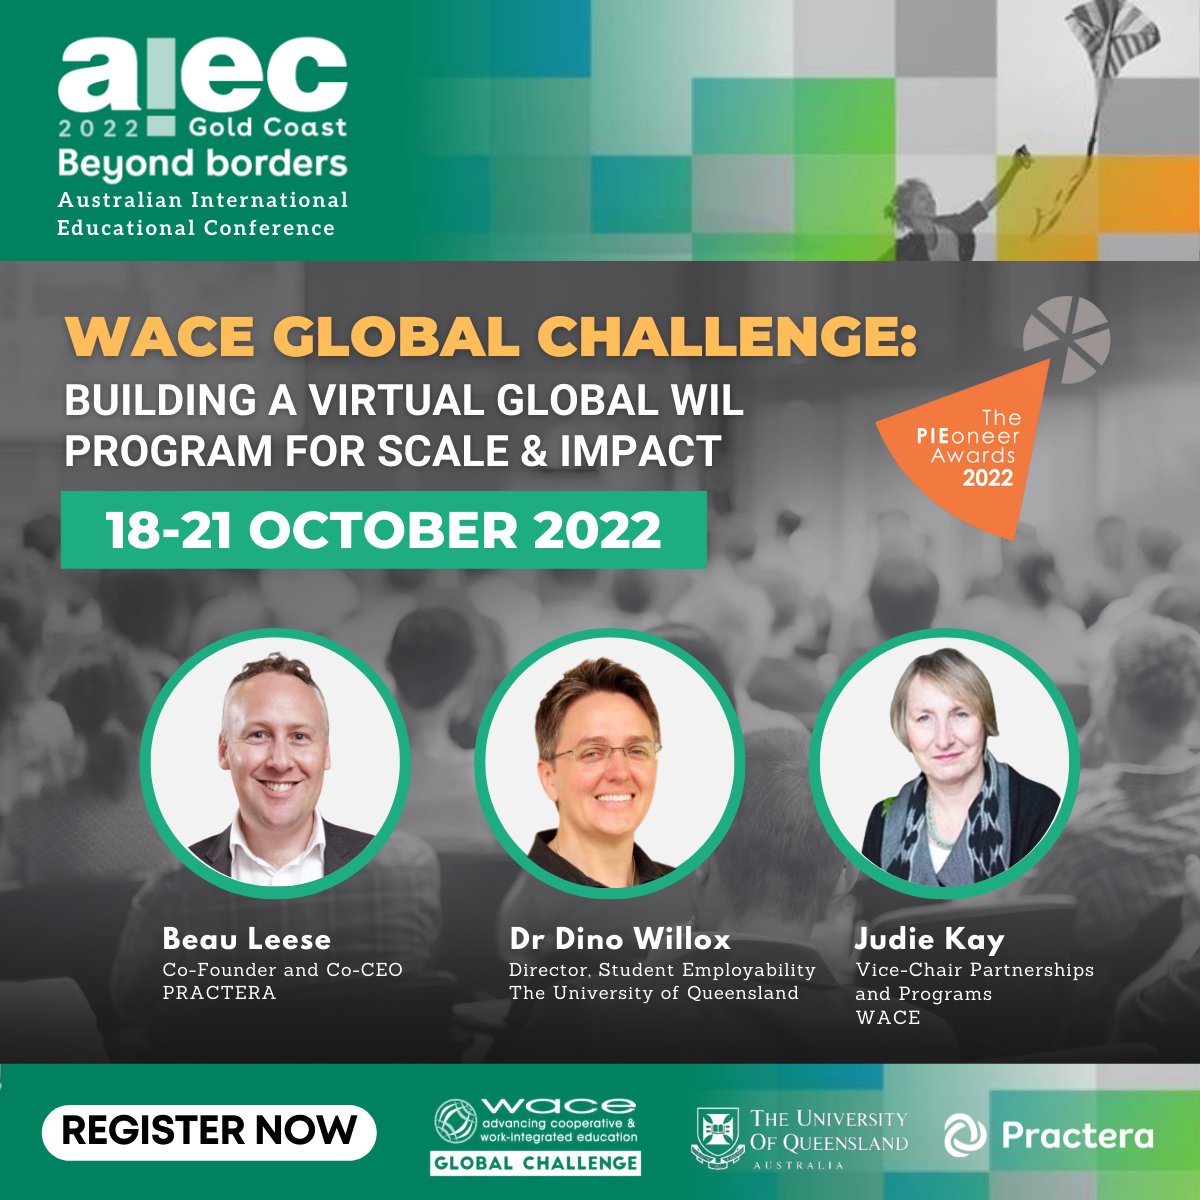 Join the discussion at 4.30 pm on 19th October at #AIEC. Register here for a spot : 
👉 hubs.li/Q01nYXL40

#aiec2022